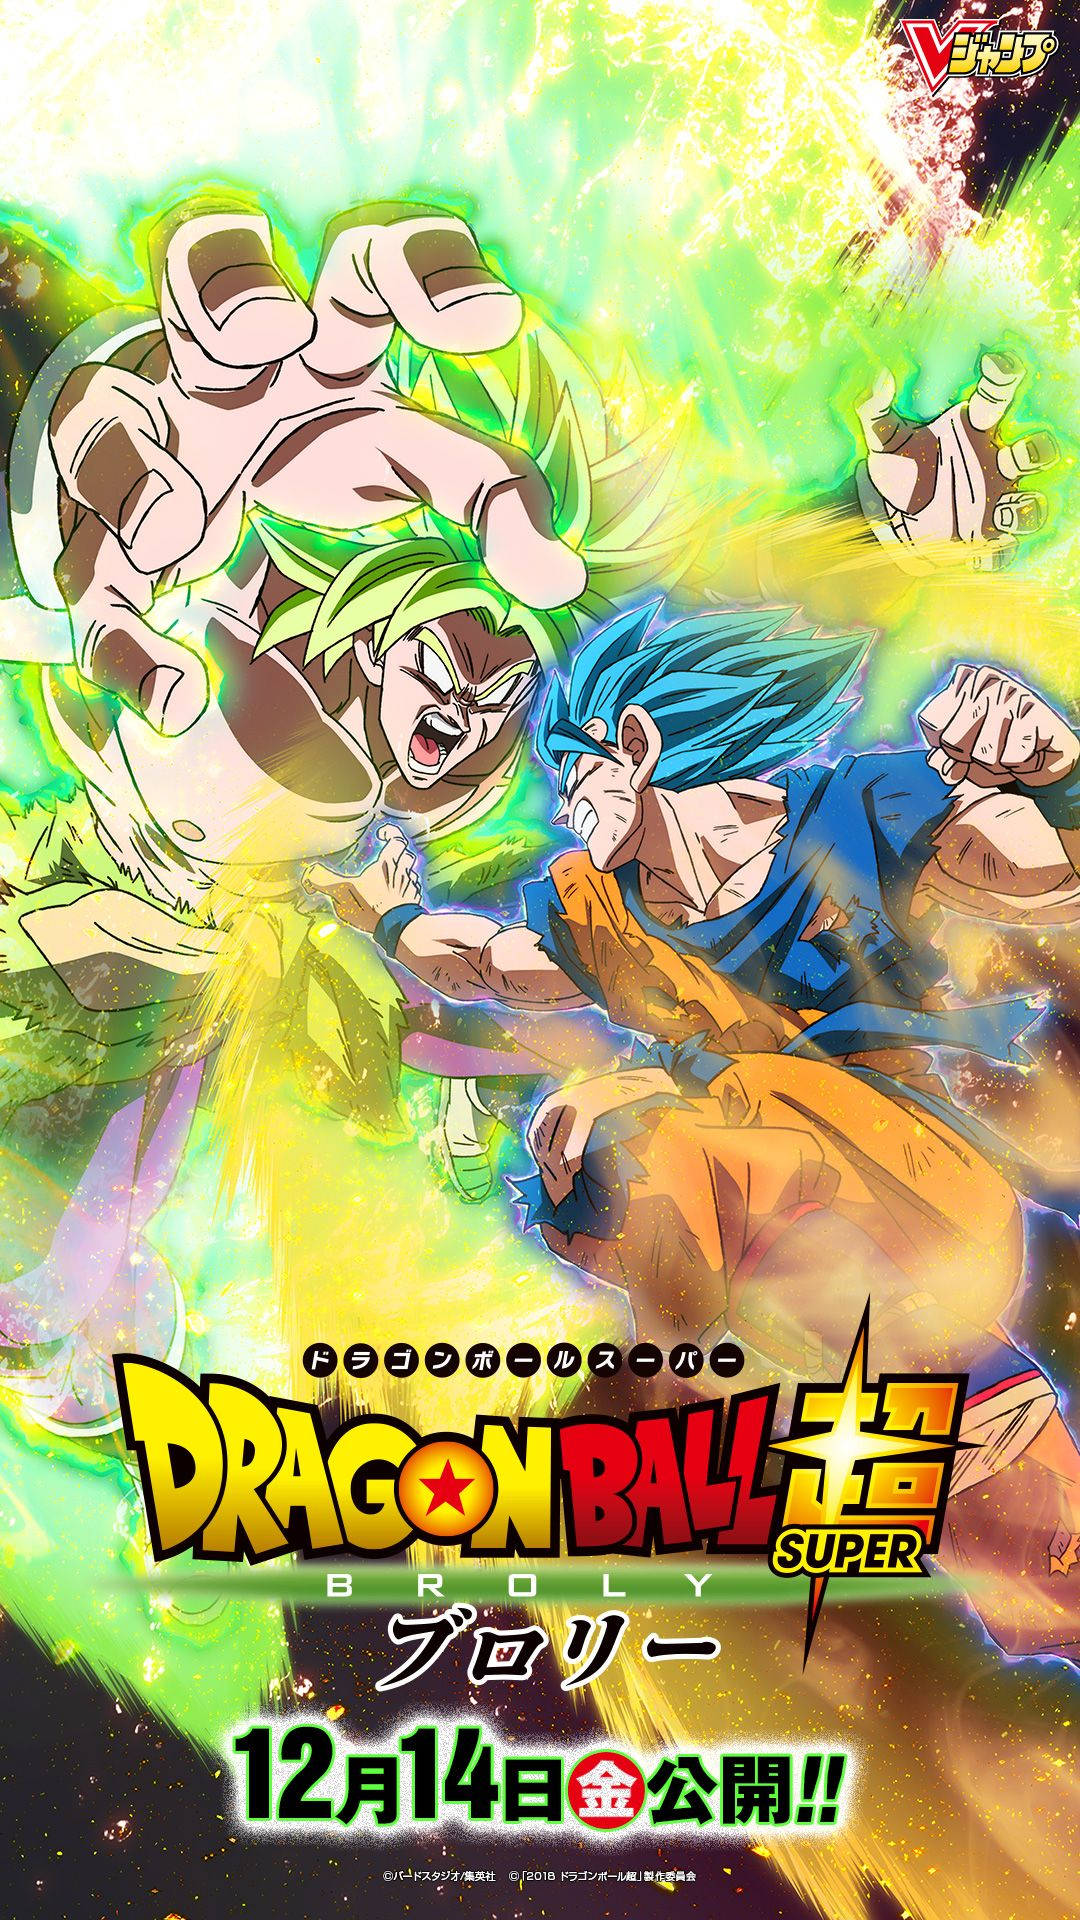 Goku and Broly face off in the epic Dragon Ball Super Broly movie Wallpaper